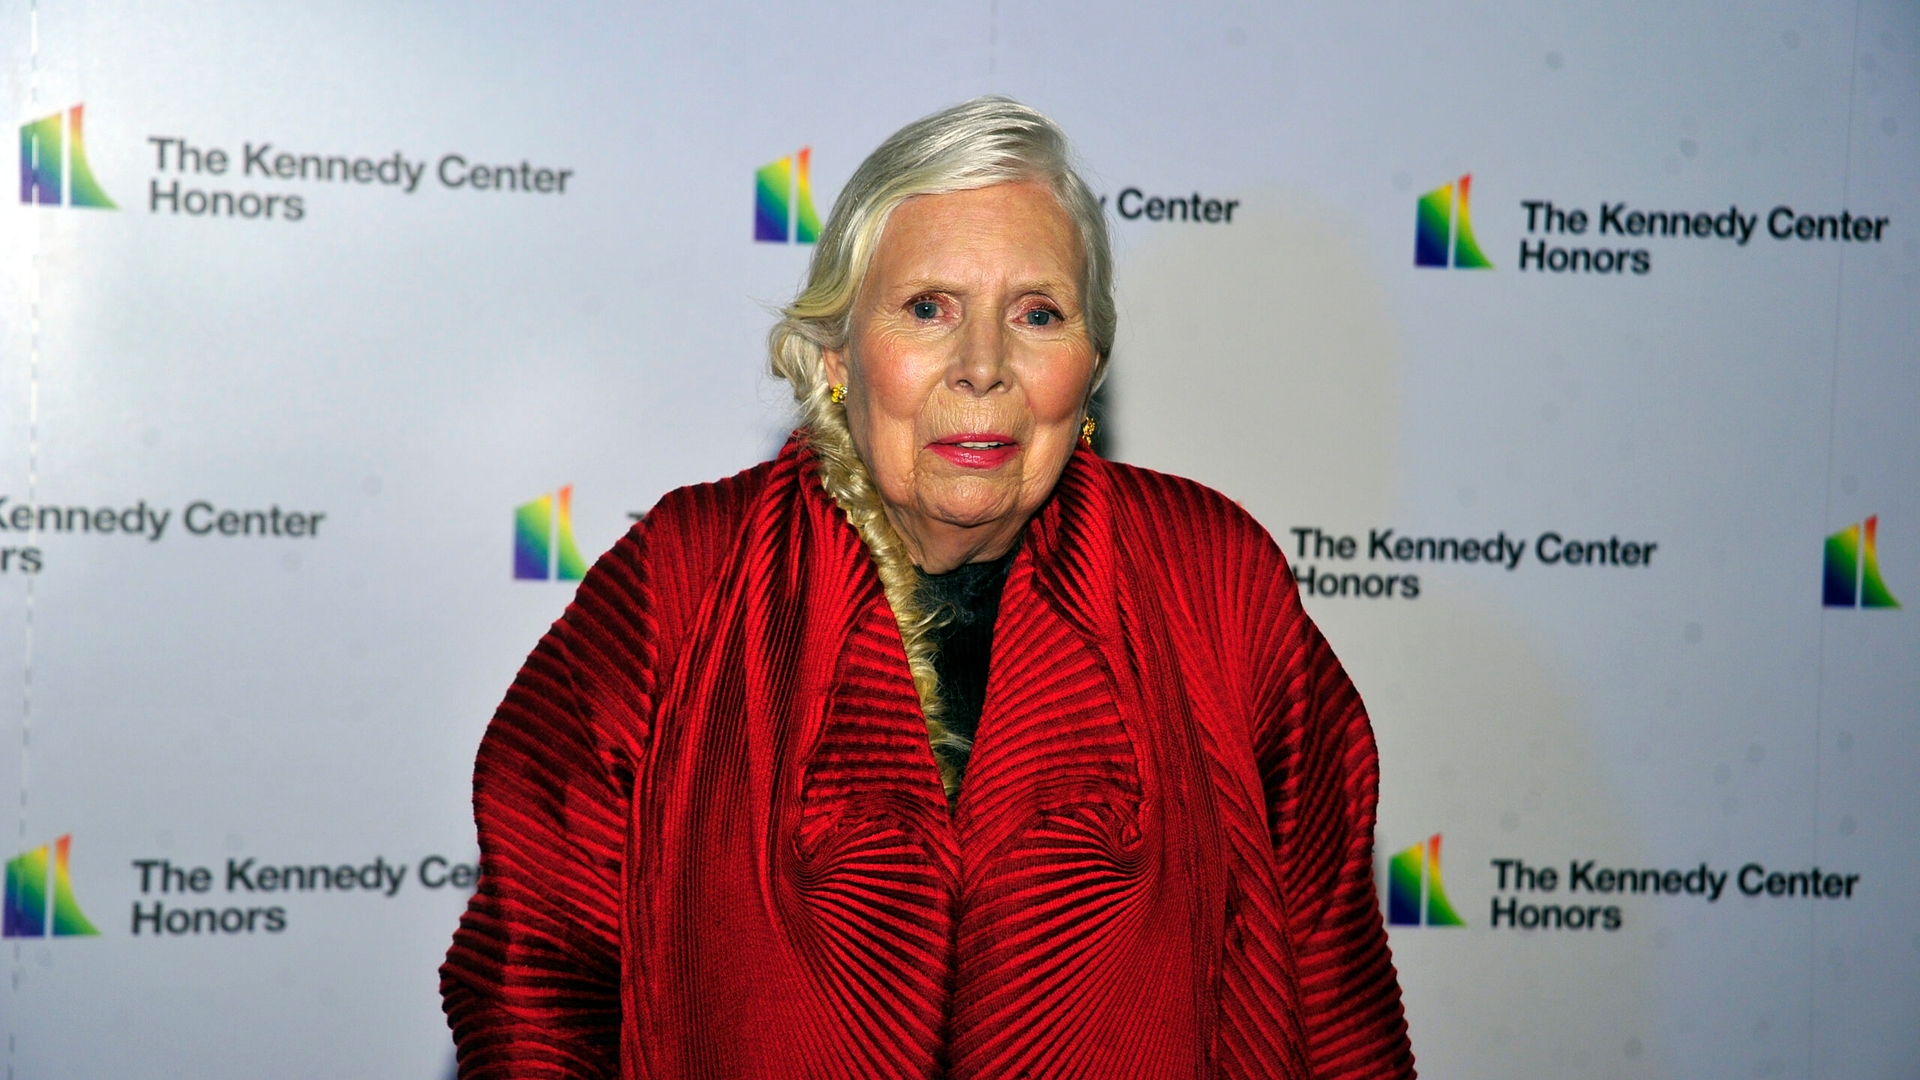 44th Annual Kennedy Center Honors formal dinner arrivals